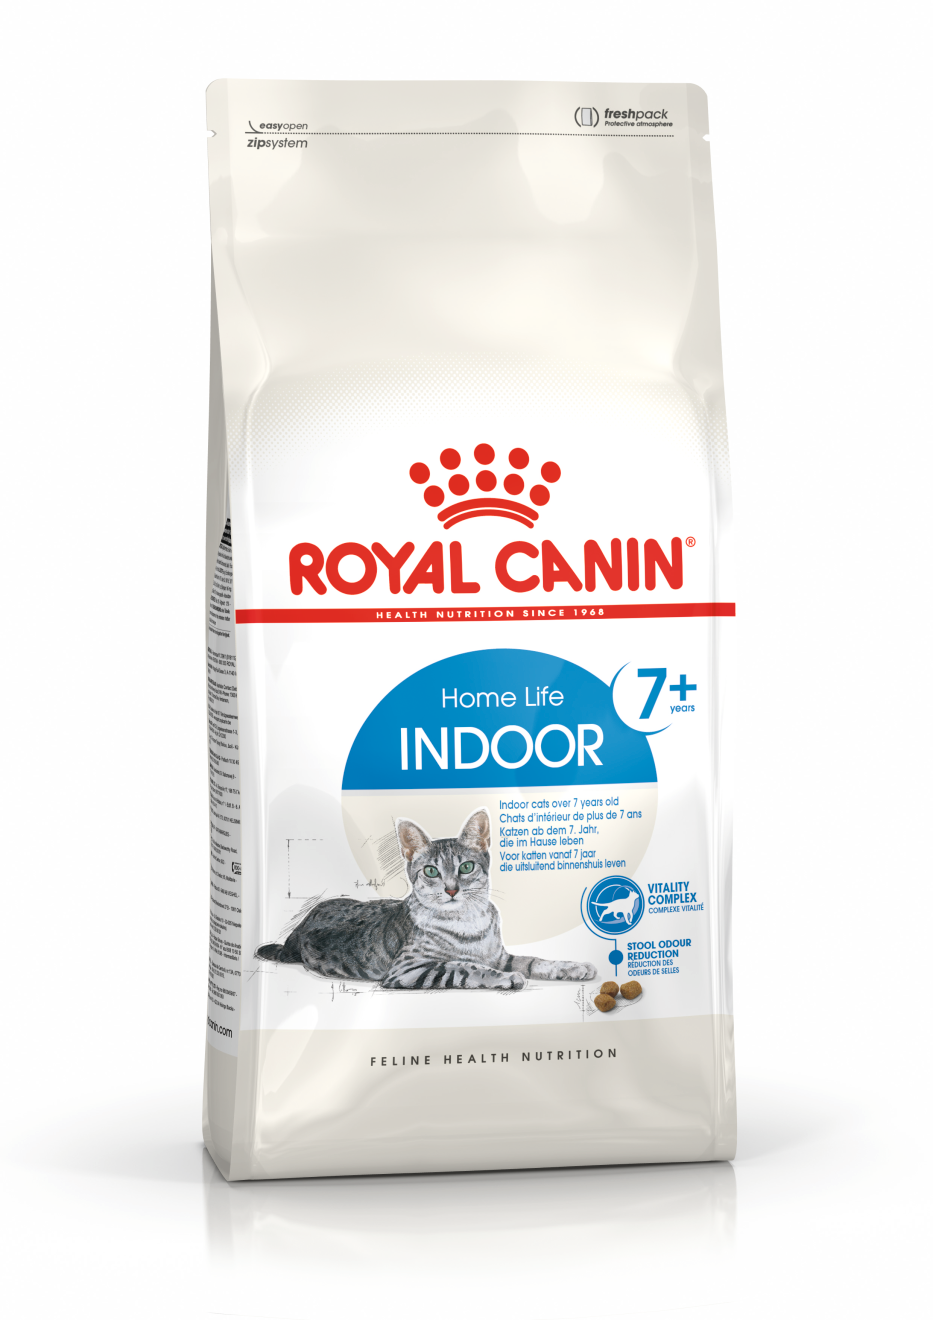 Keep Your Indoor Cat Happy & Healthy with Royal Canin Feline Care Nutrition Indoor Dry Cat Food